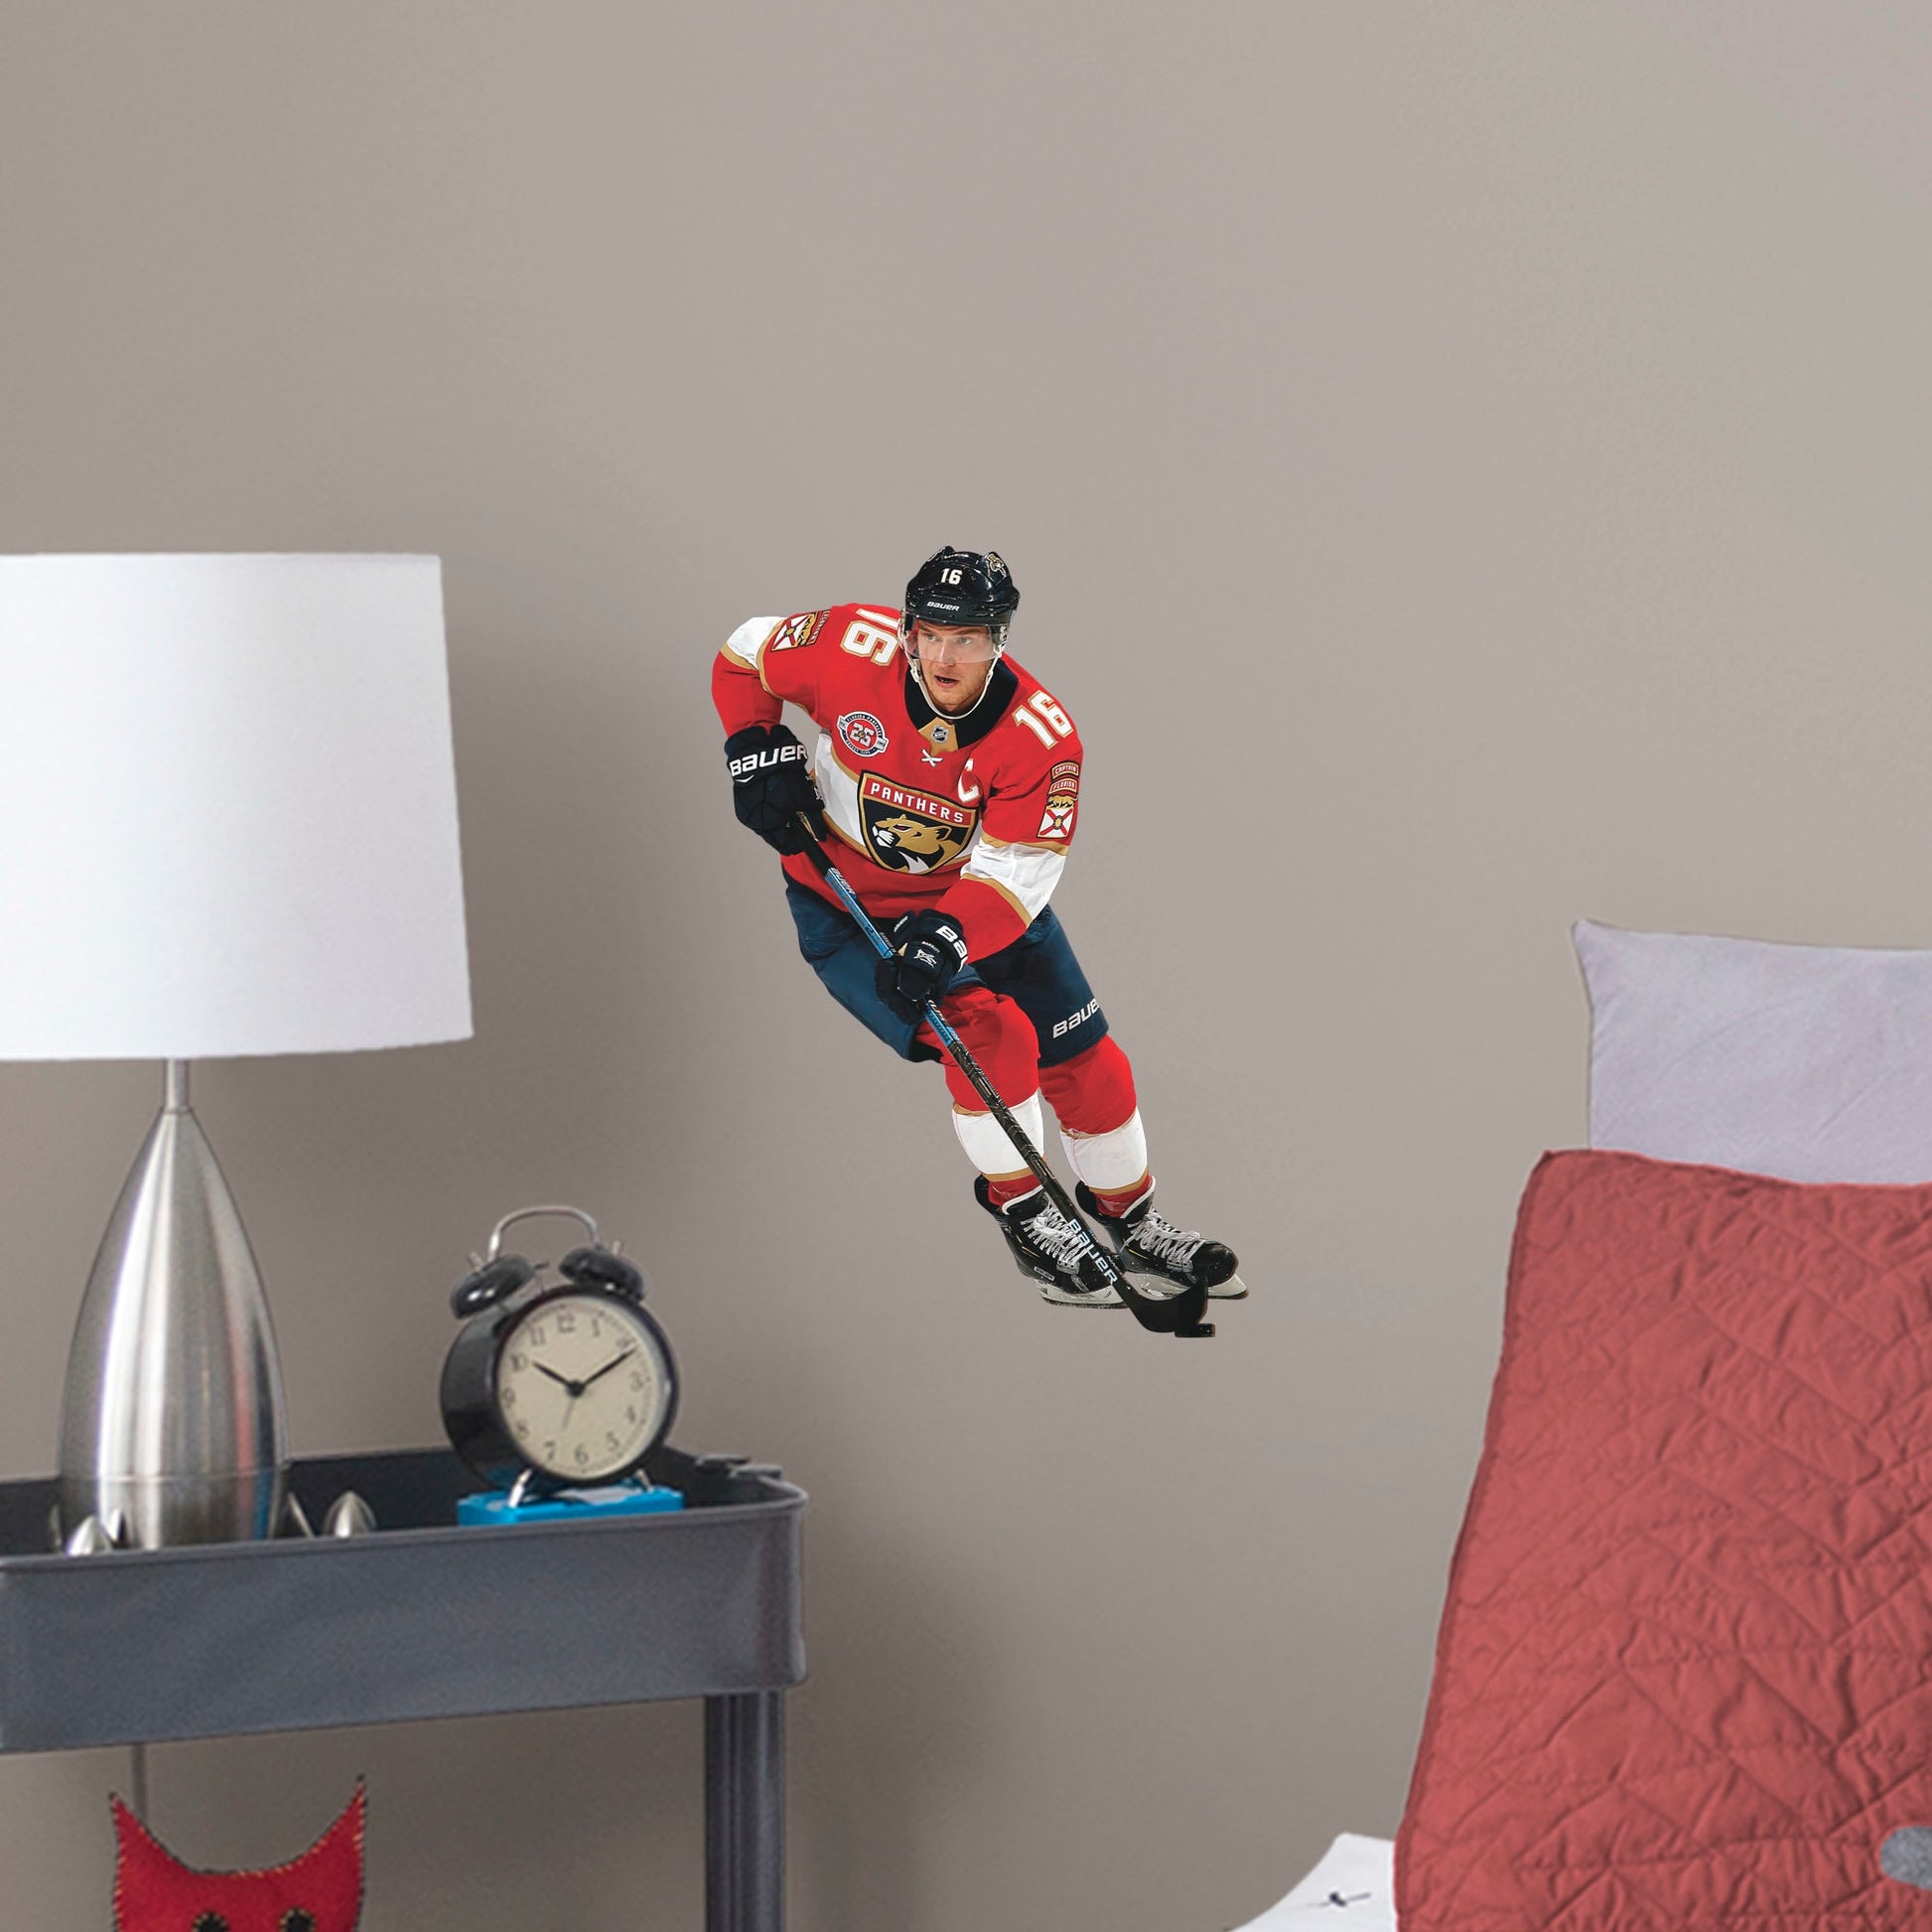 Giant Athlete + 2 Team Decals (36"W x 78"H) NHL fans and Panthers fanatics alike love Aleksander Barkov, the clutch captain from Florida, and now you can bring his skill to life in your own home! Seen here in action on the ice, this durable and bold wall decal will make the perfect addition to your bedroom, office, fan room, or any spot in your house! 